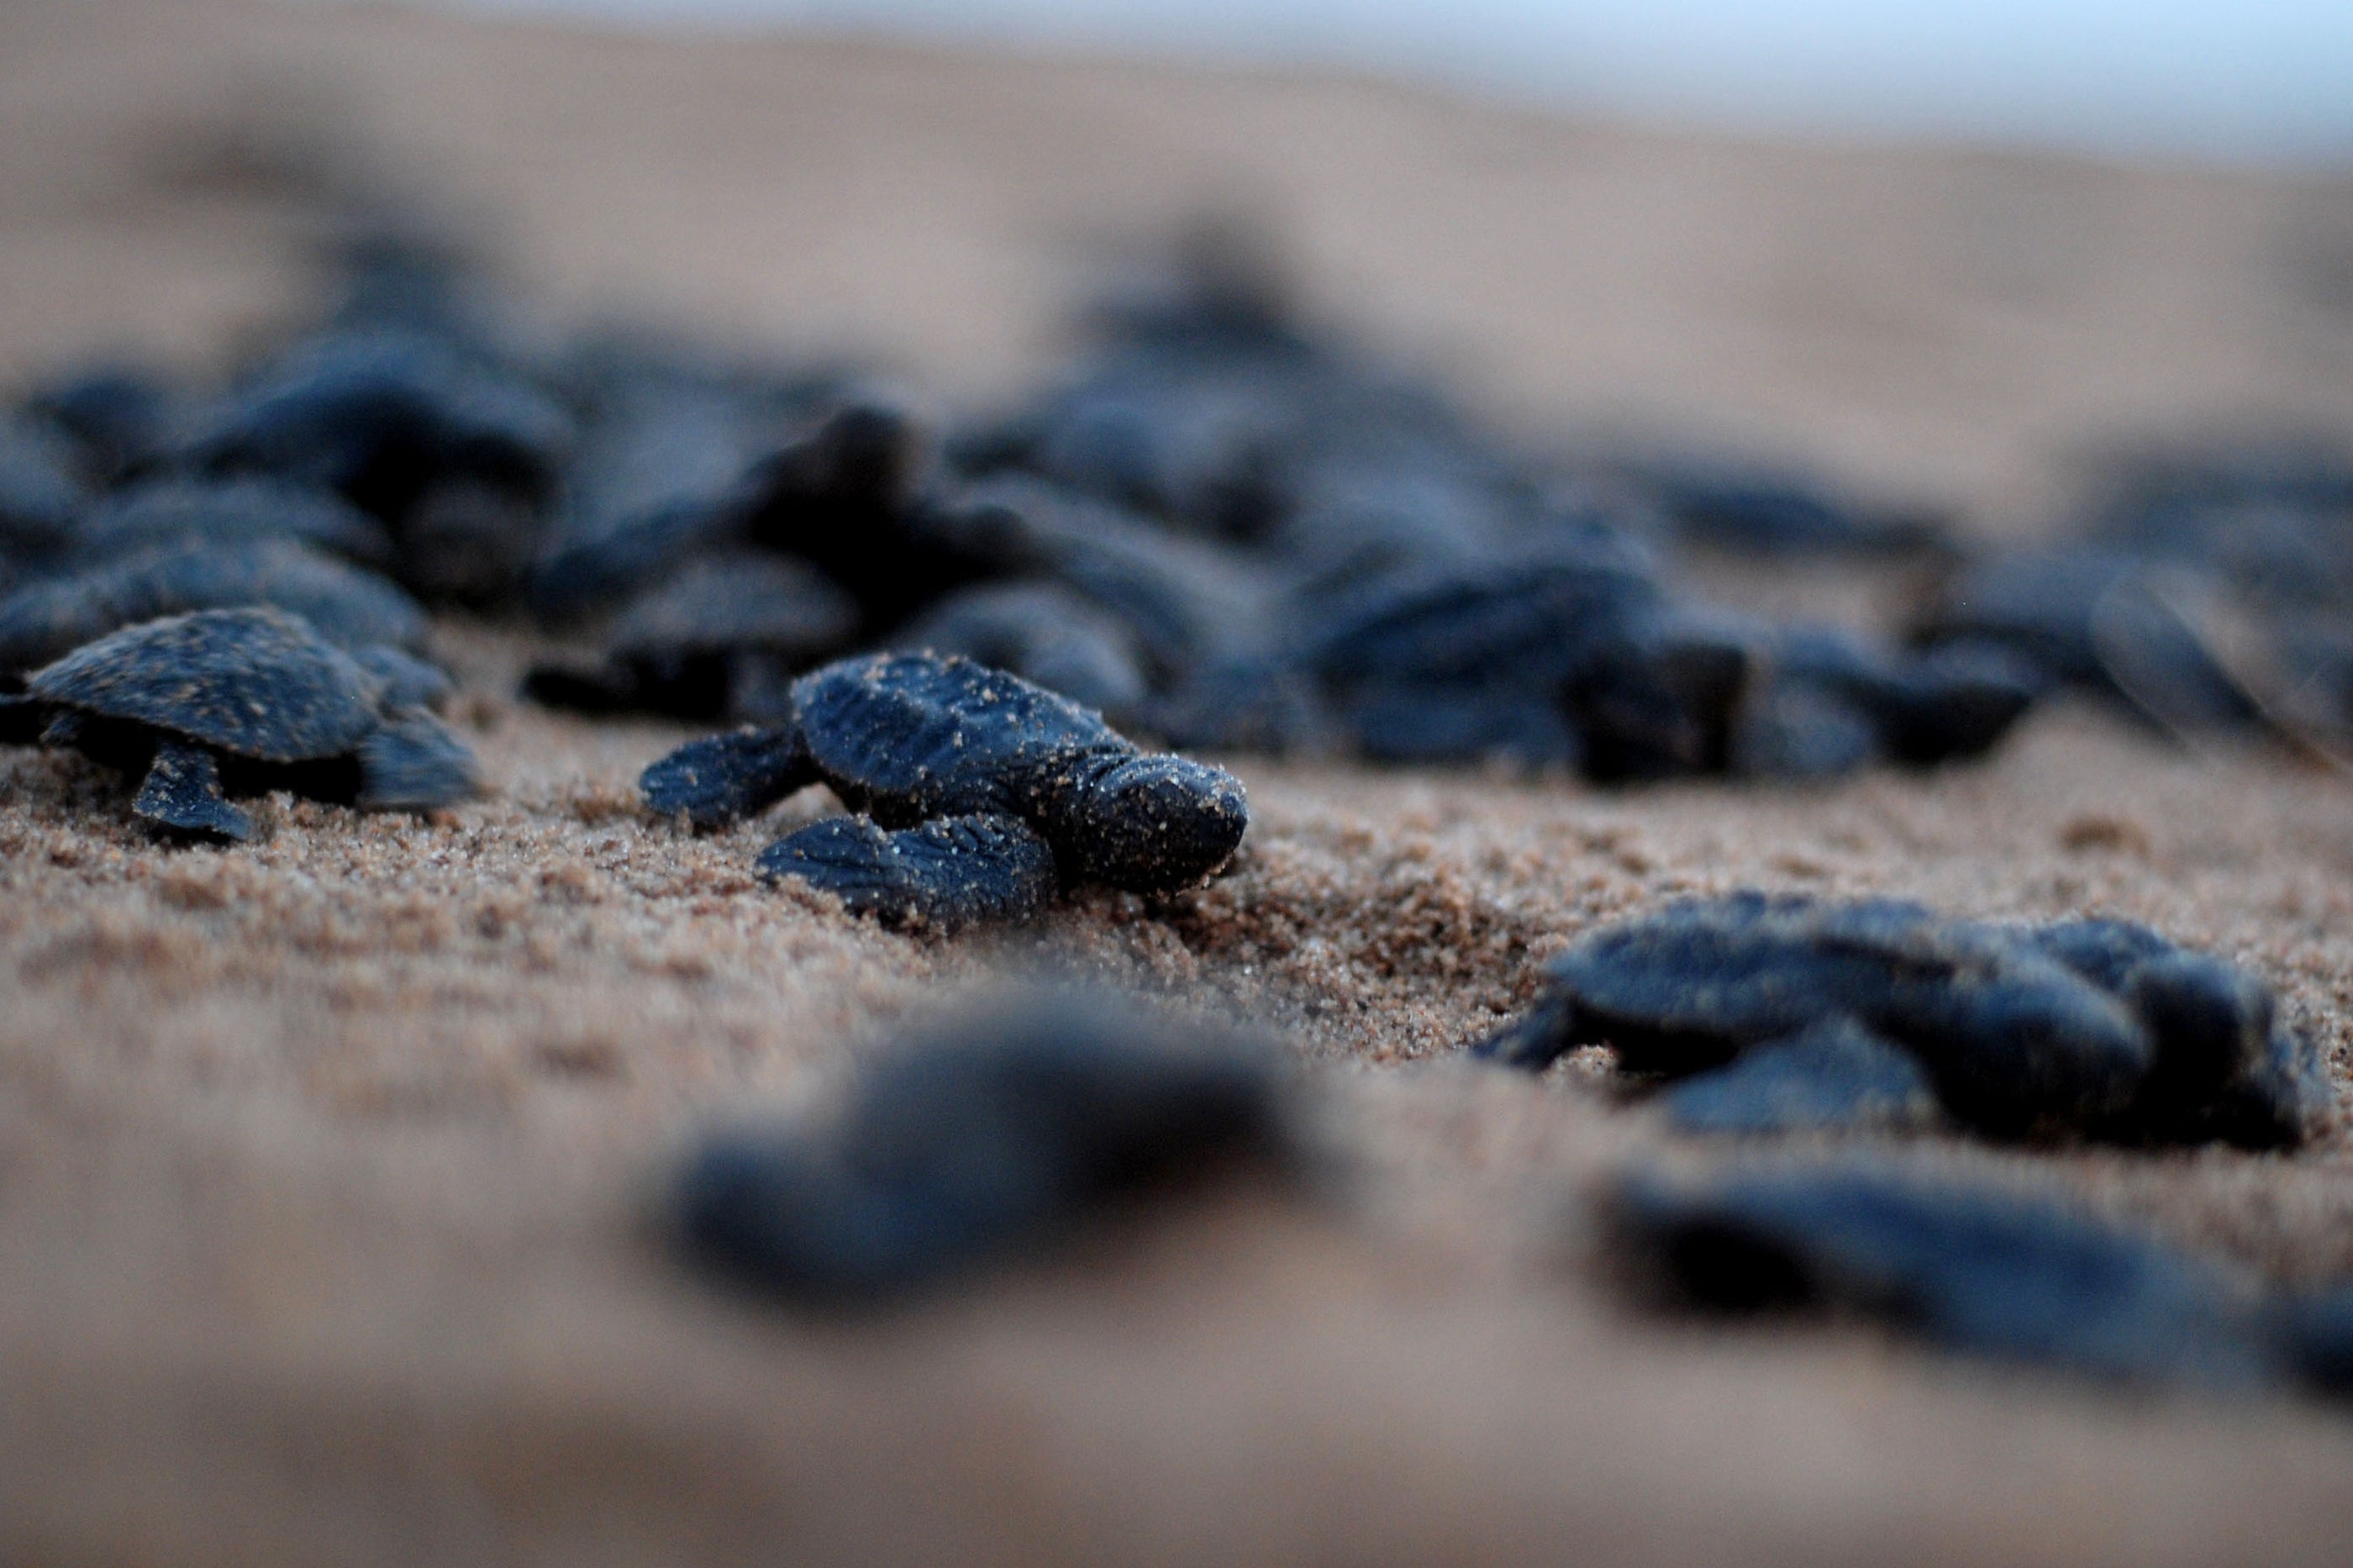 File Image: Newly-hatched Olive Ridley turtles make their way to the ocean at a beach in the Indian state of Odisha